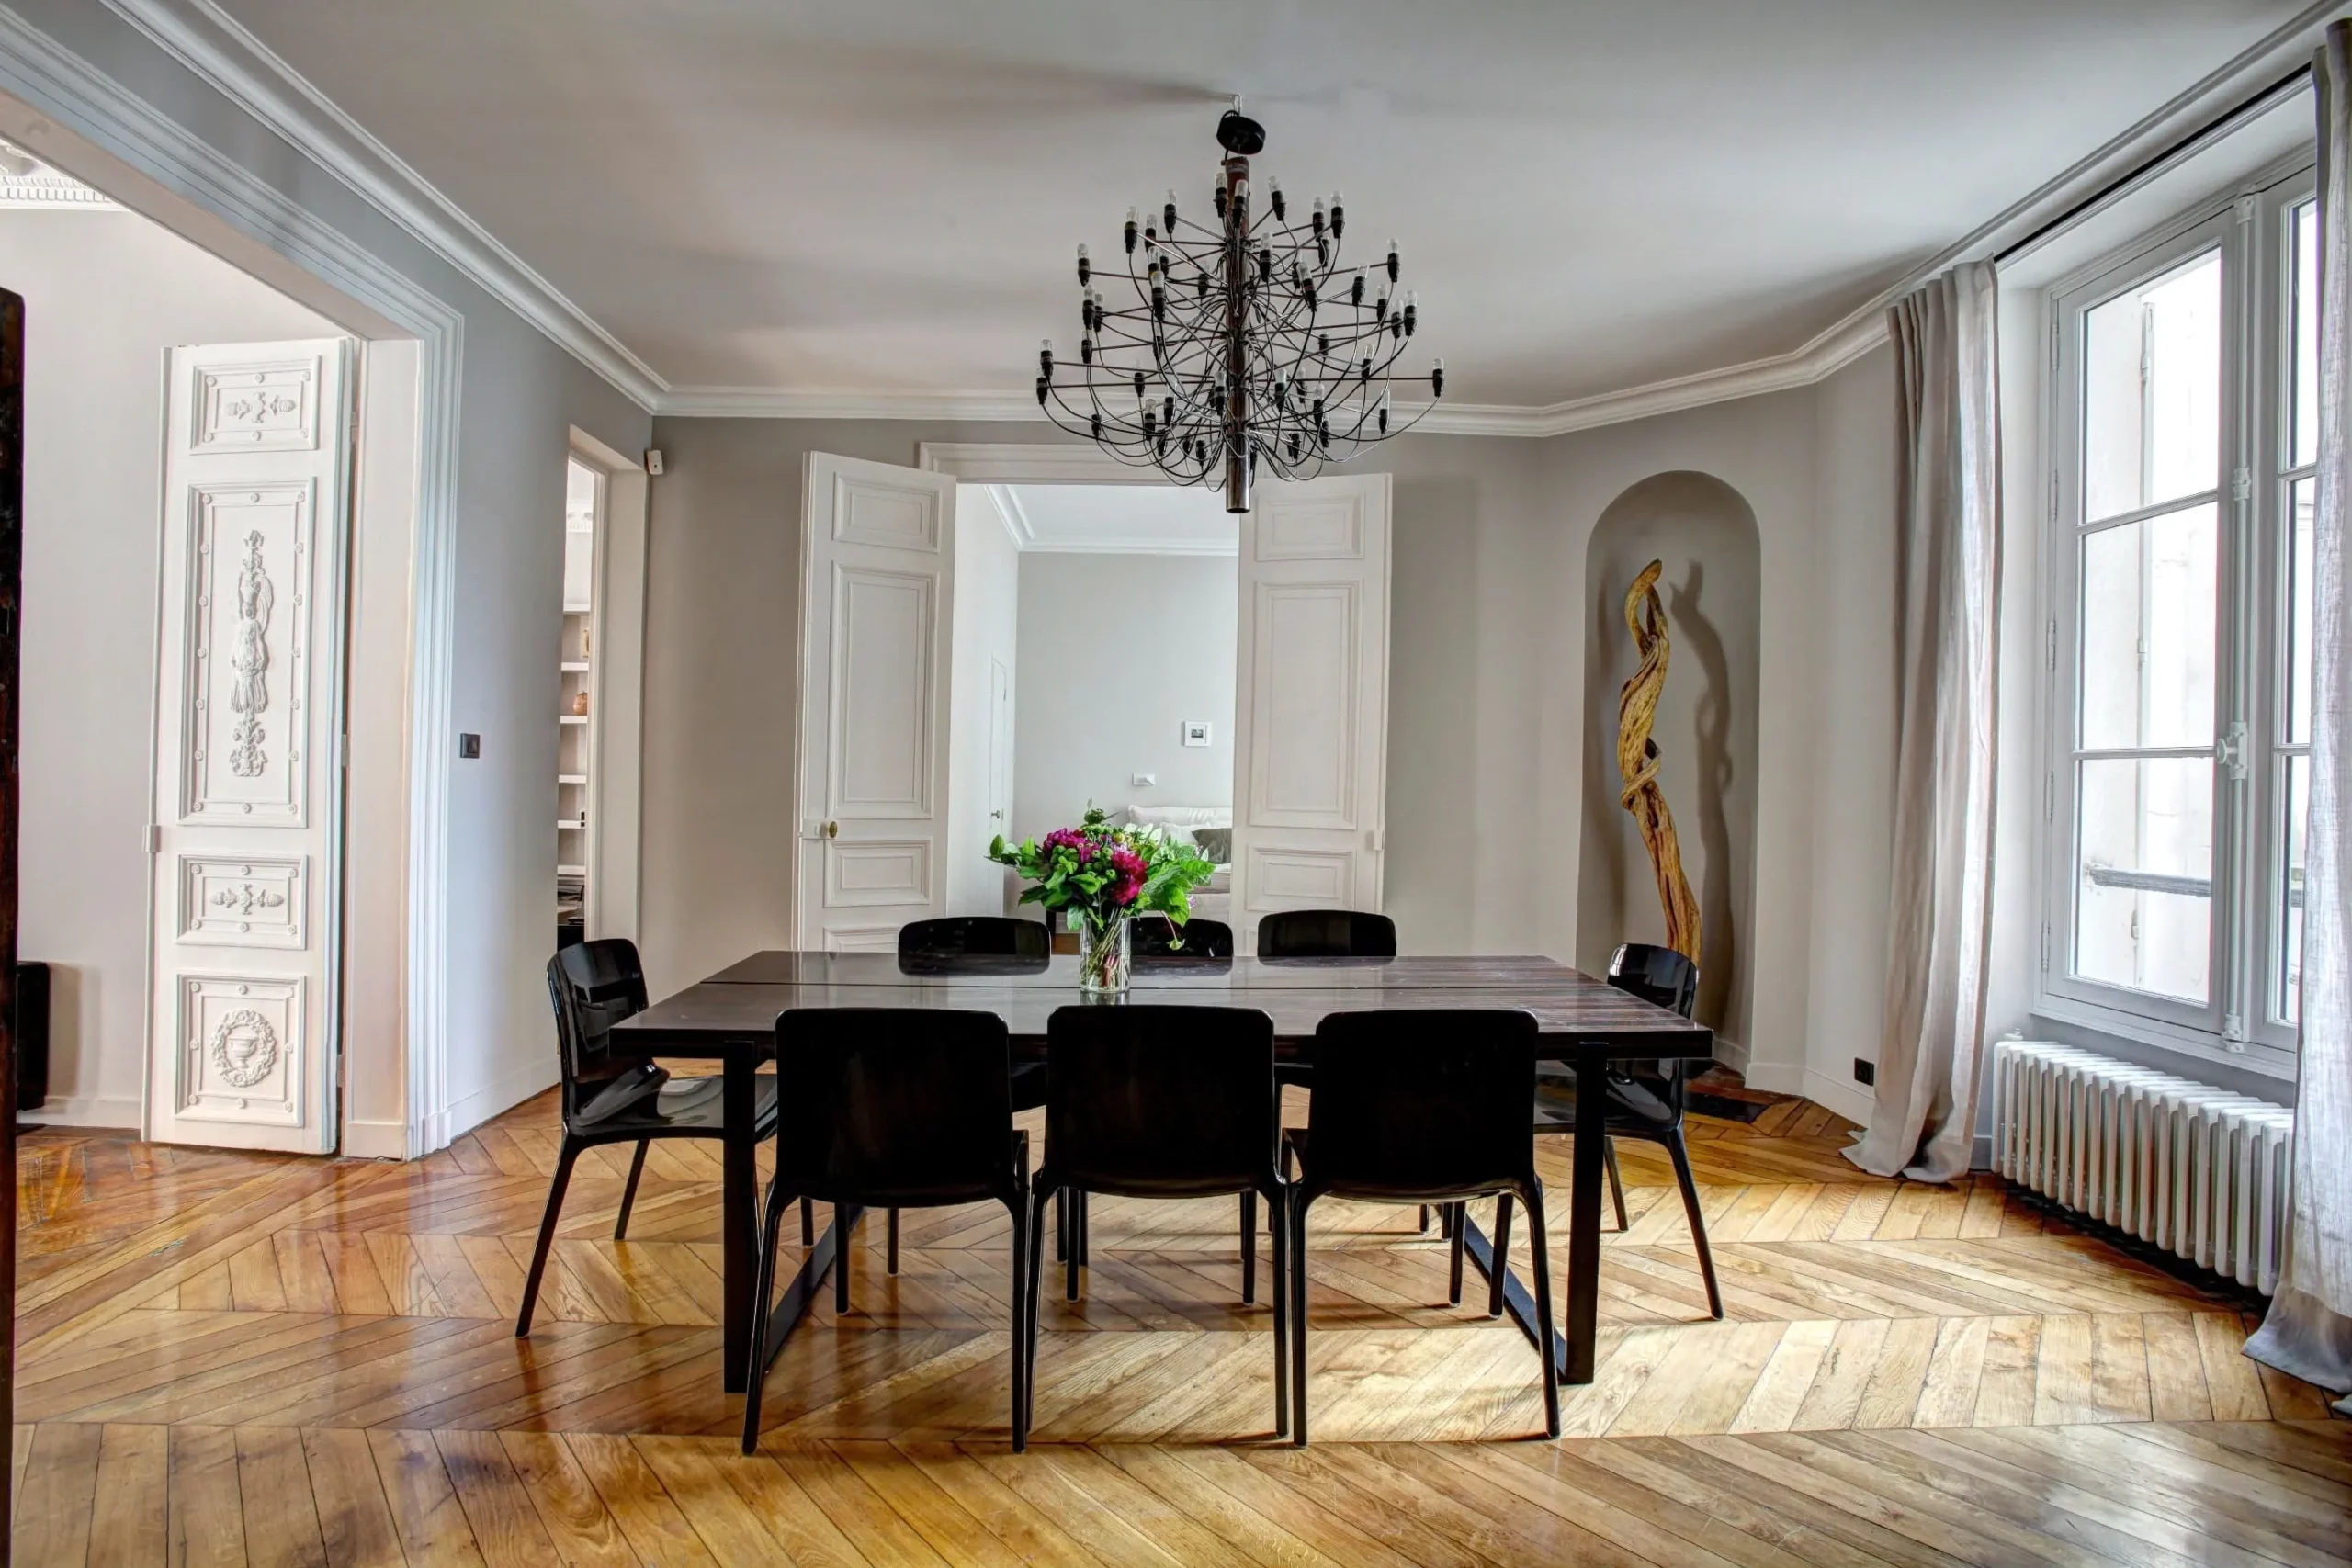 A dining table in a luxurious interiors of a house with decorative placed on the corner of a dining room